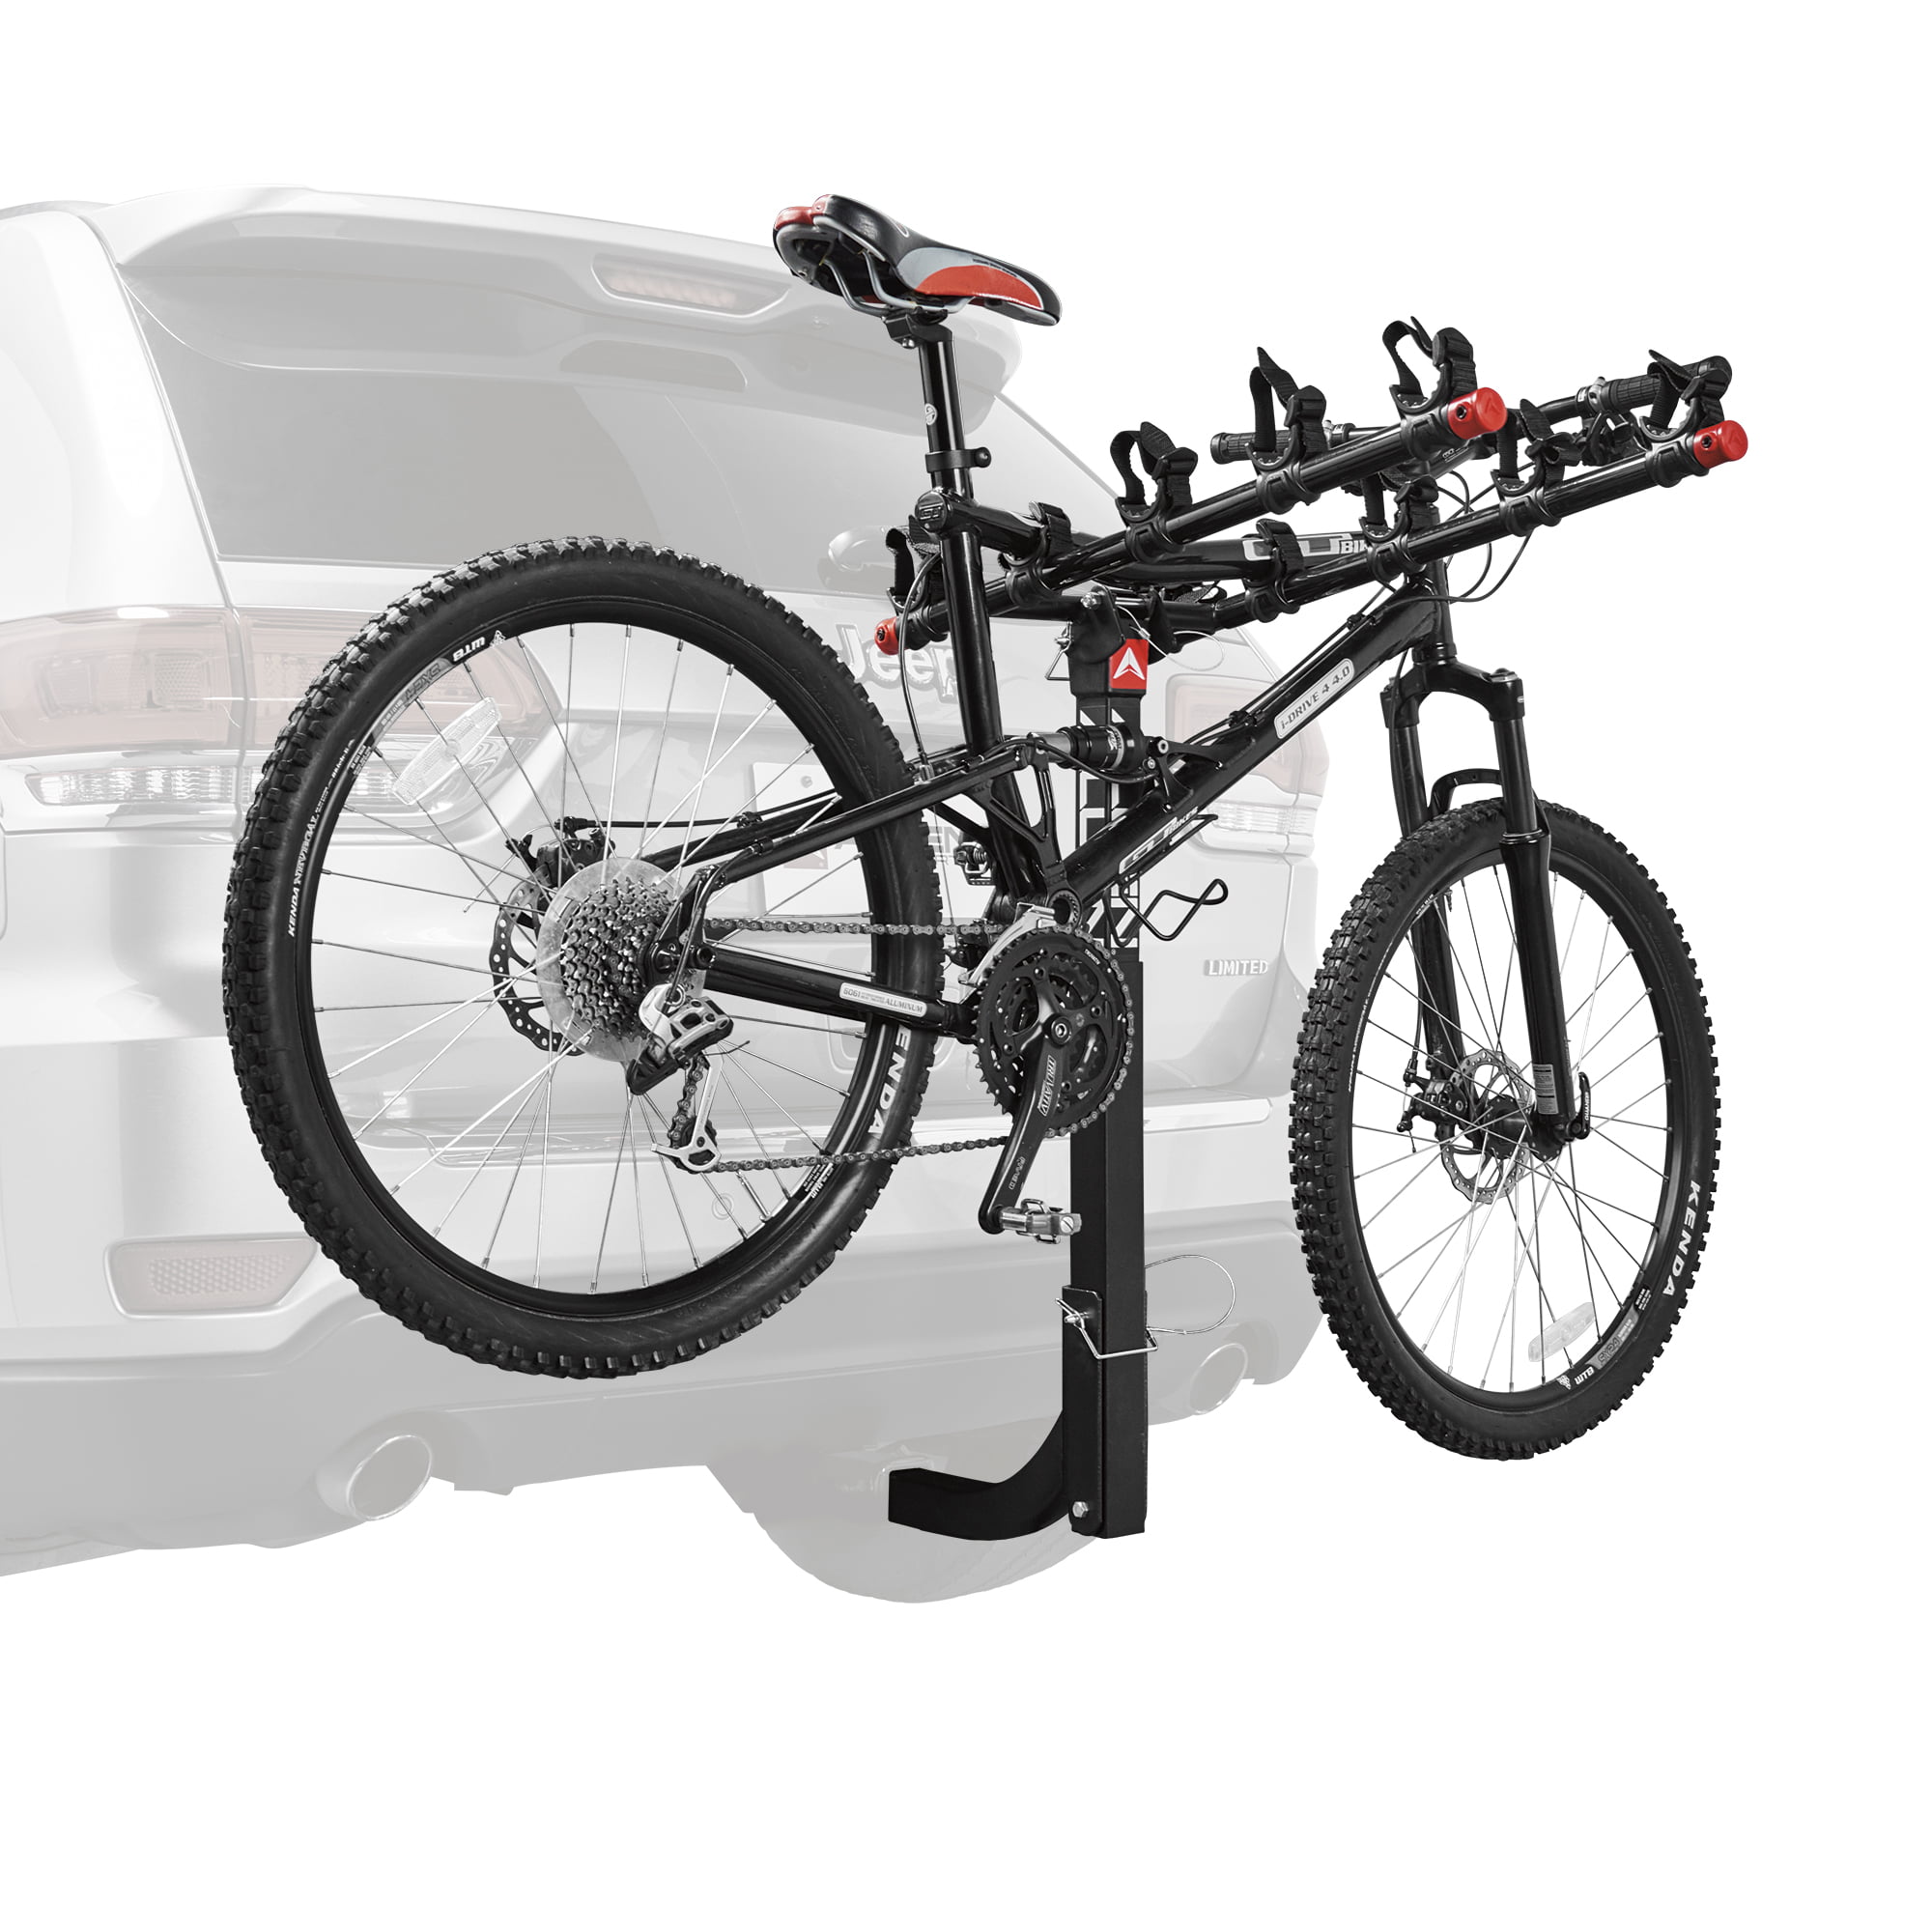 New Allen Sports Deluxe Locking 2-Bicycle Hitch Bike Mount Rack Carrier 522RR 